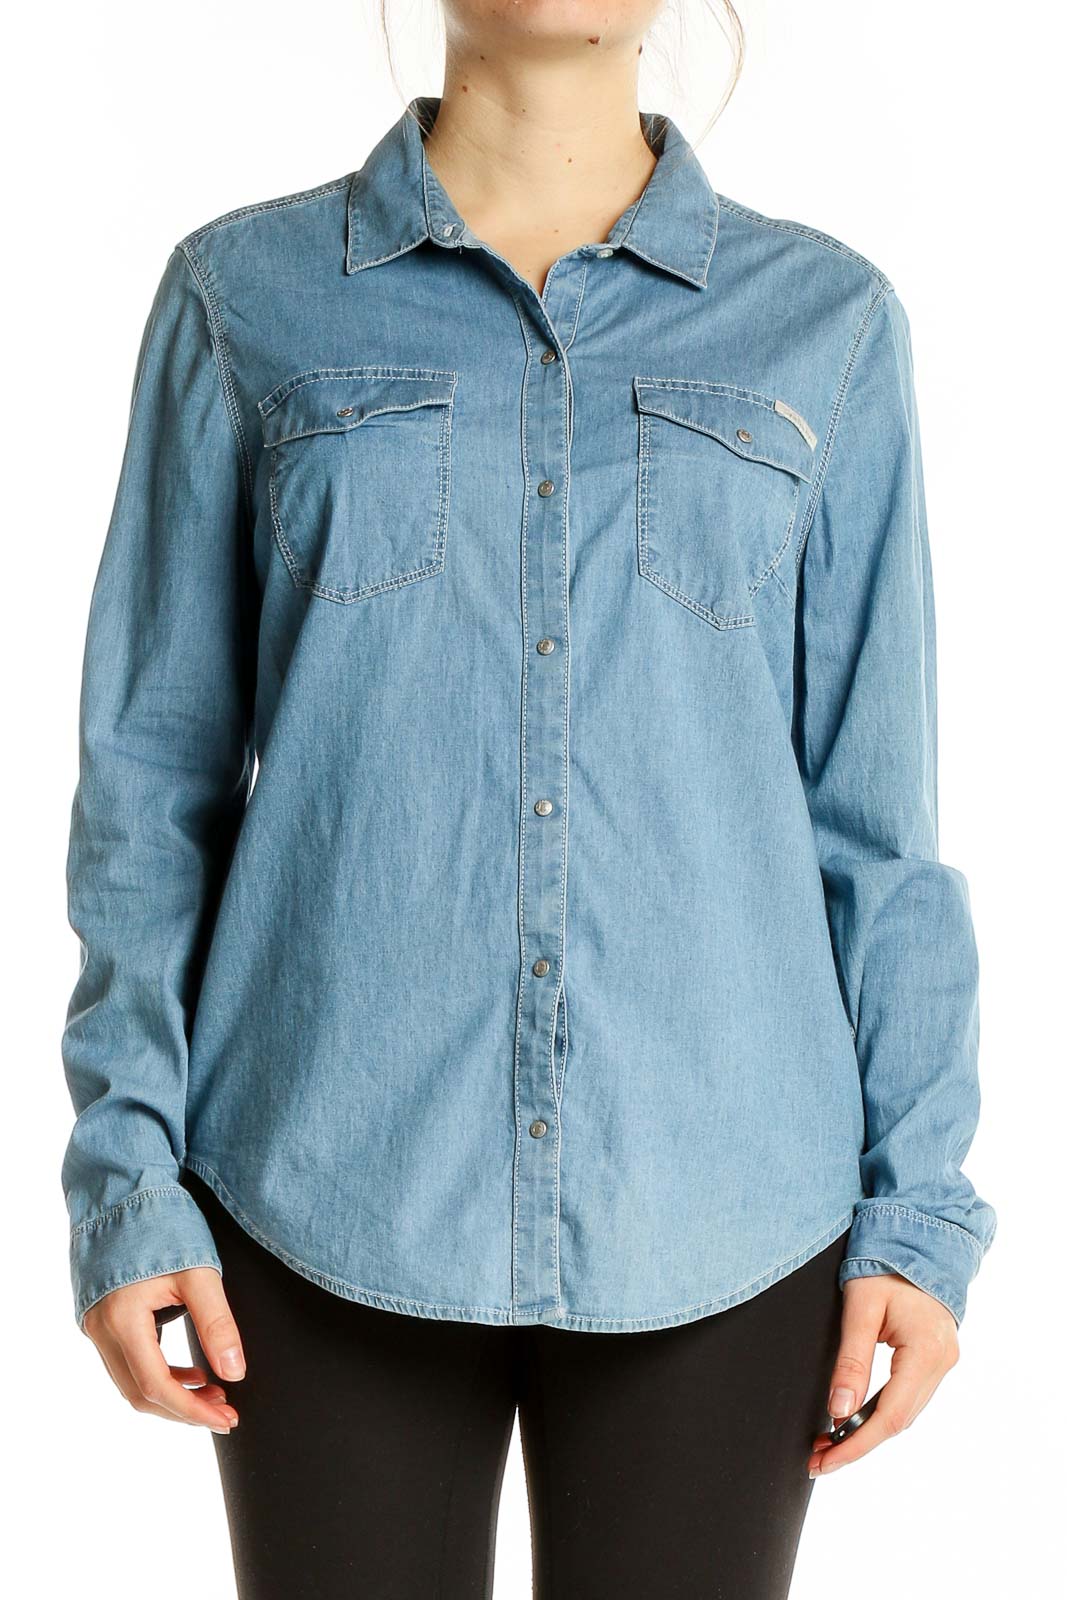 Blue Collared Long Sleeve Shirt Front